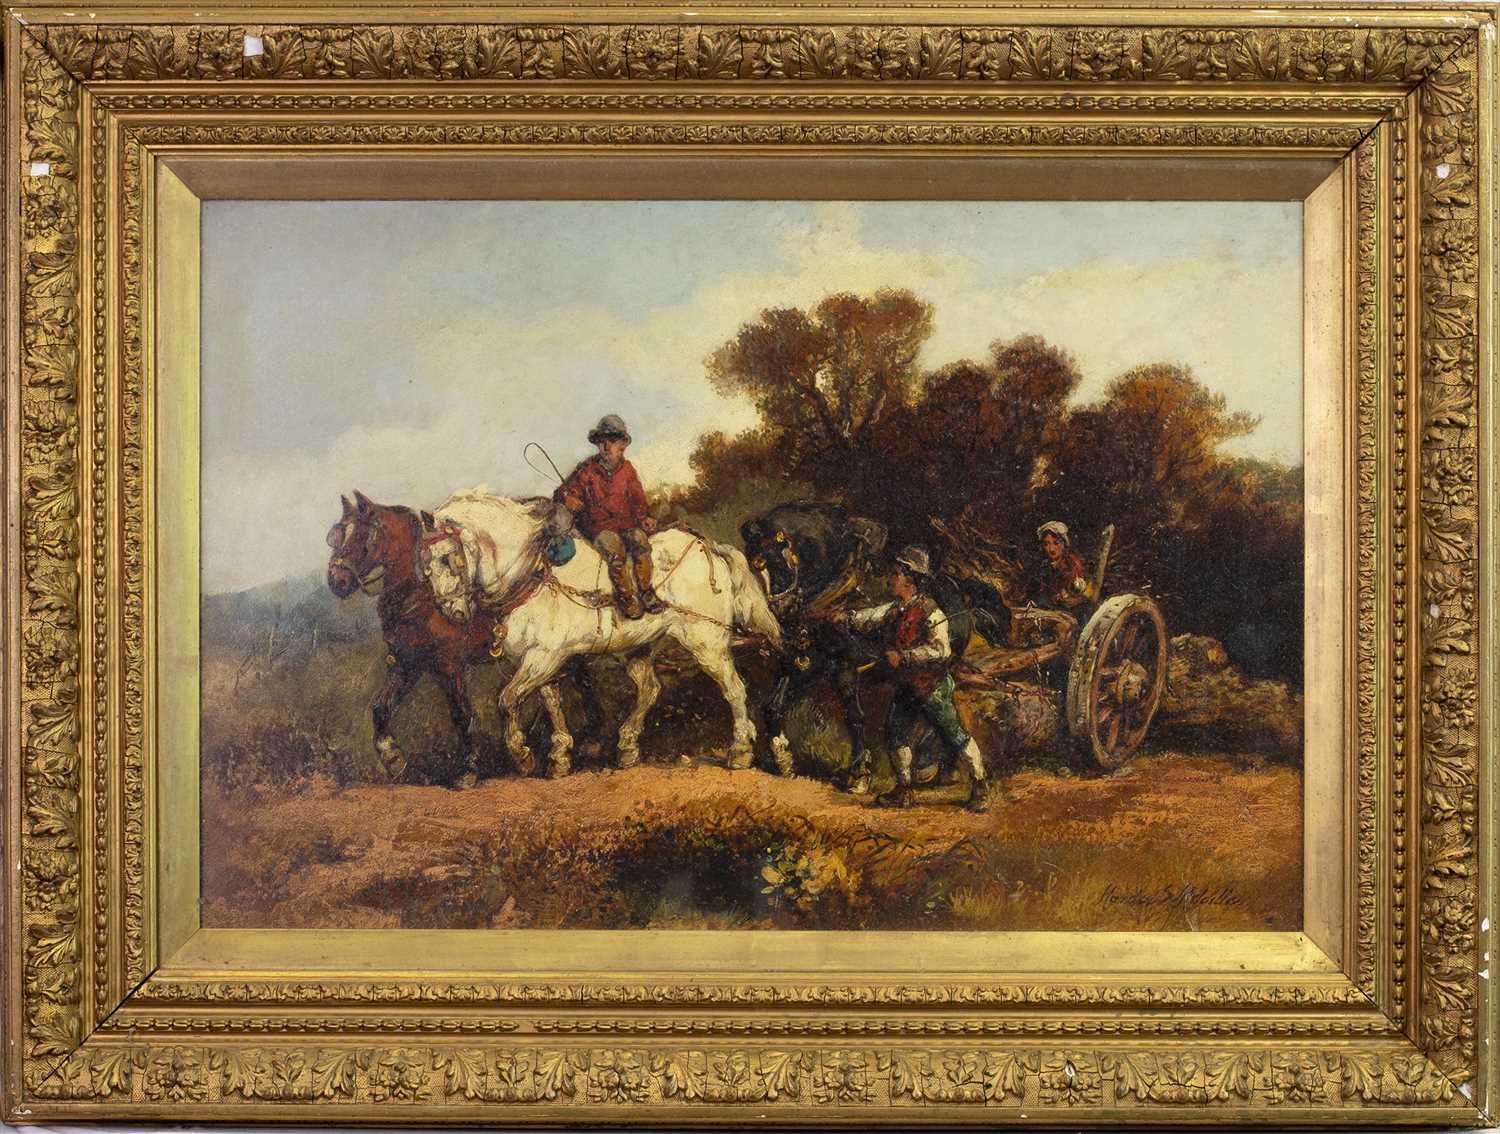 Lot 54 - RURAL SCENE WITH FIGURES AND CLYDESDALES, AN OIL